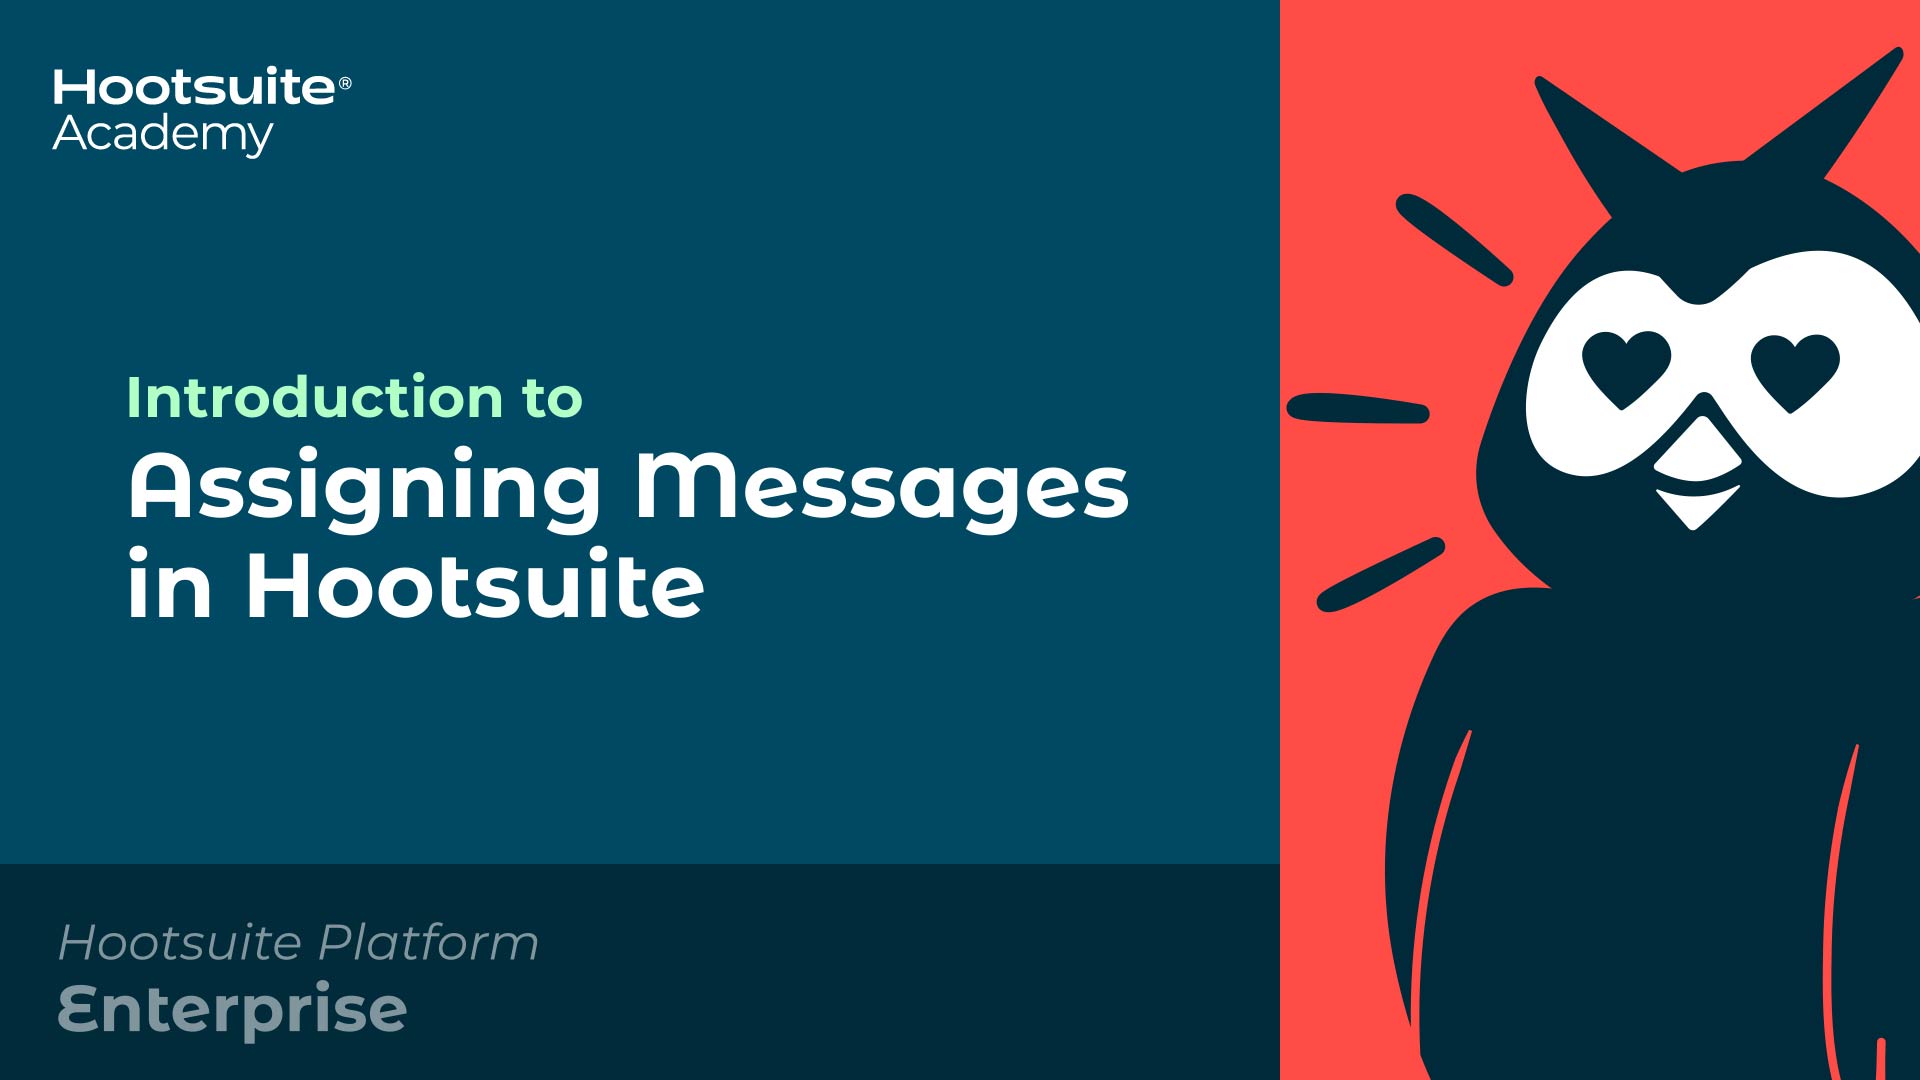 Introduction to assigning messages with Hootsuite video.